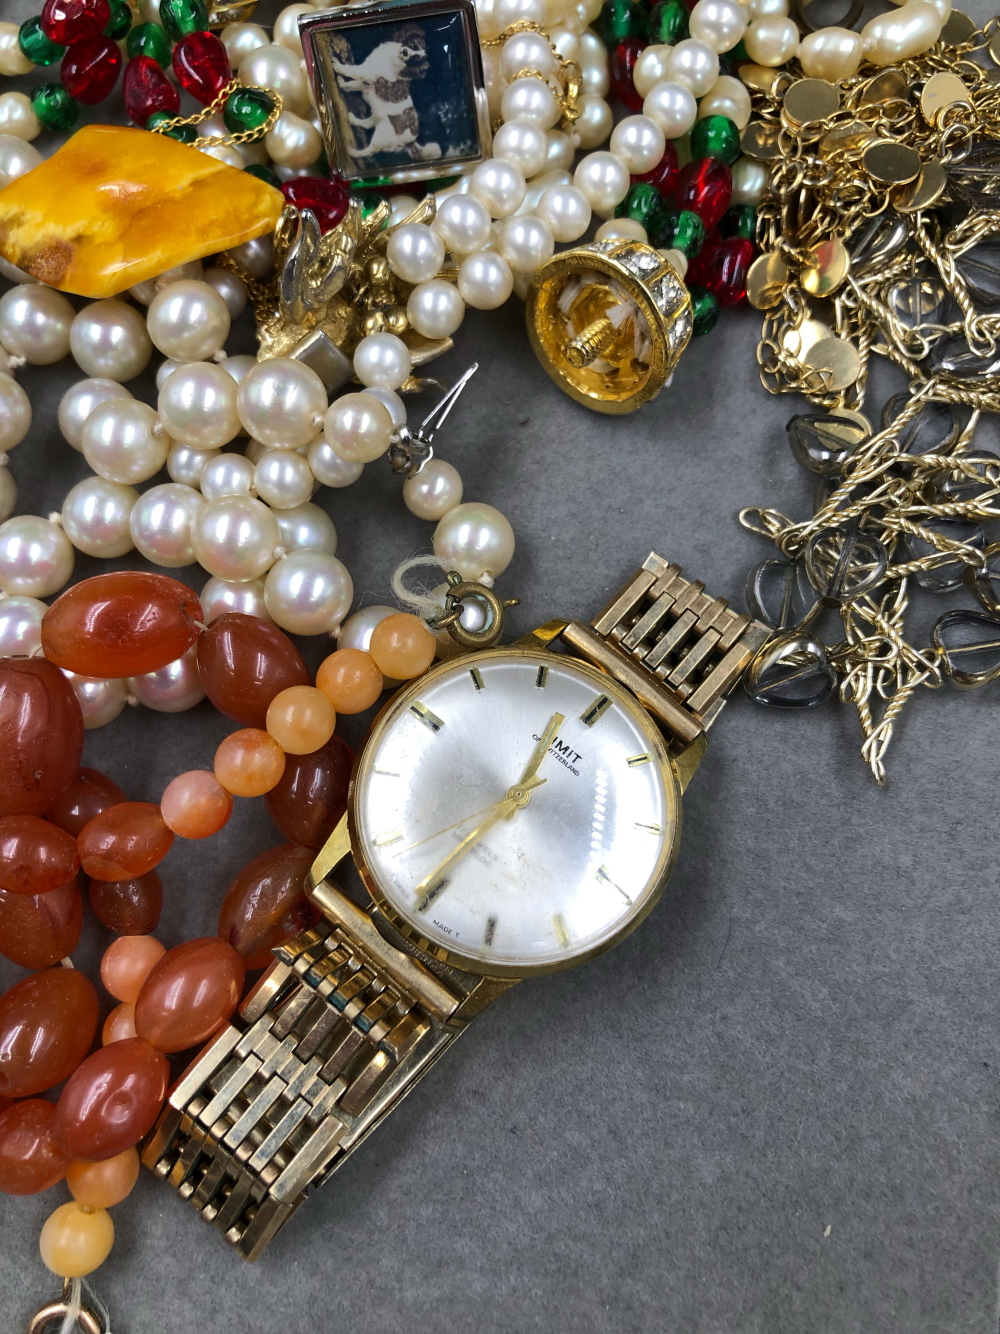 A QUANTITY OF JEWELLERY TO INCLUDE SILVER, COSTUME, BEADS, PEARLS, WATCH KEYS, ETC. - Image 11 of 15